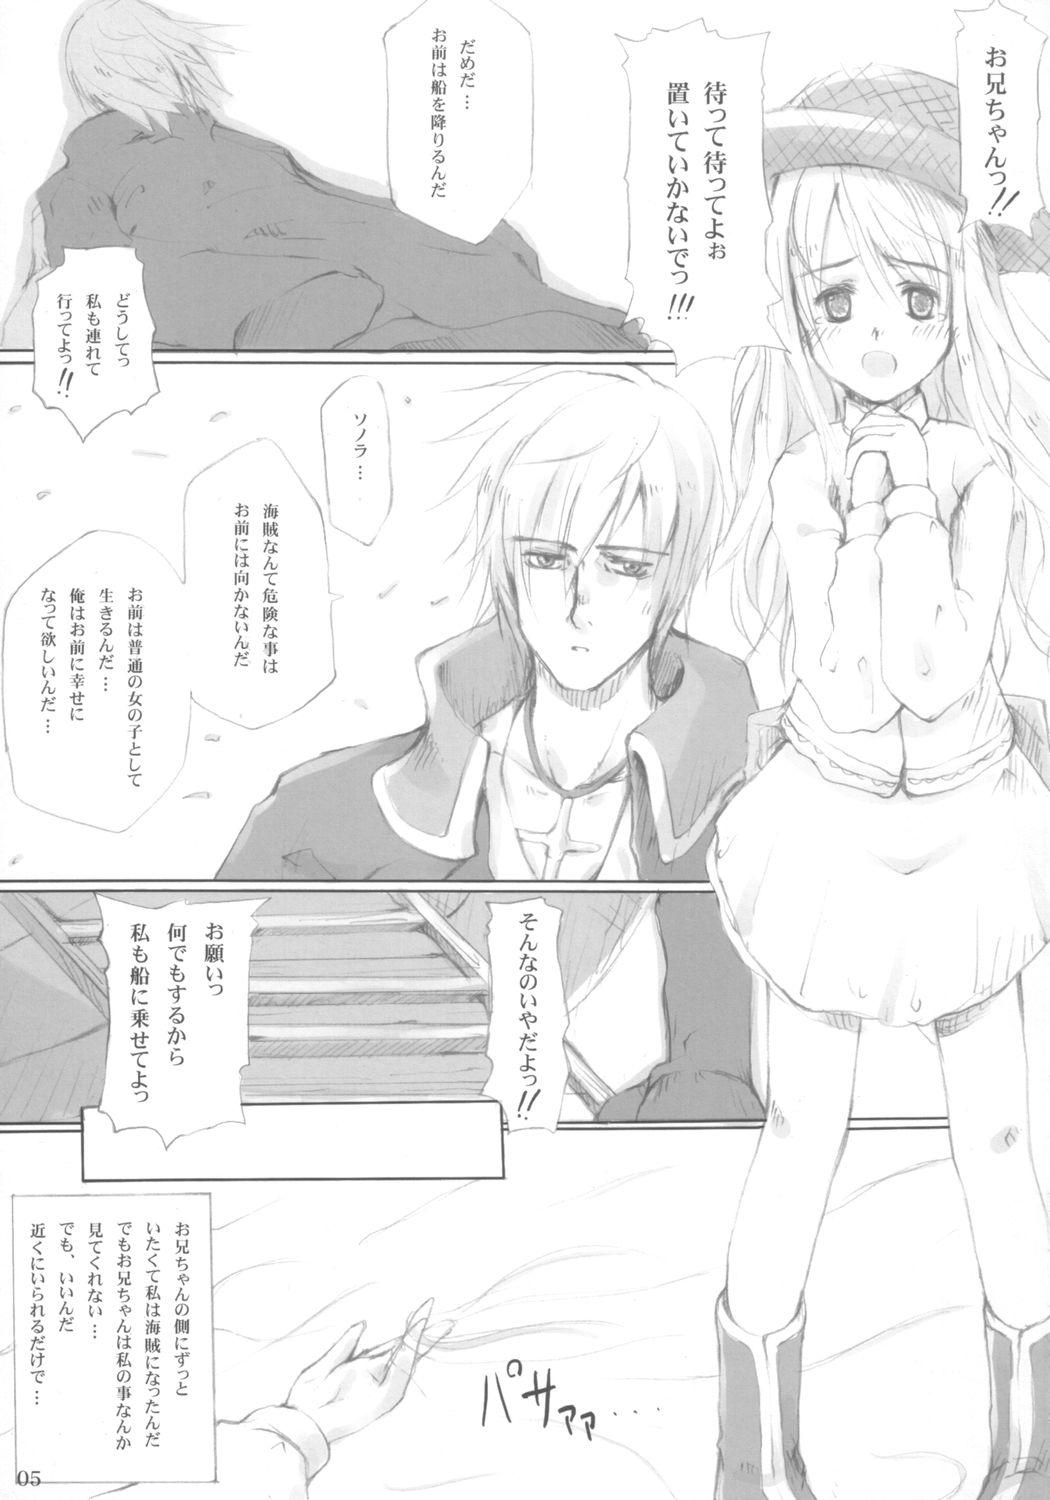 Best Blowjobs Ever low calorie milk candy - Summon night Petite Teen - Page 4